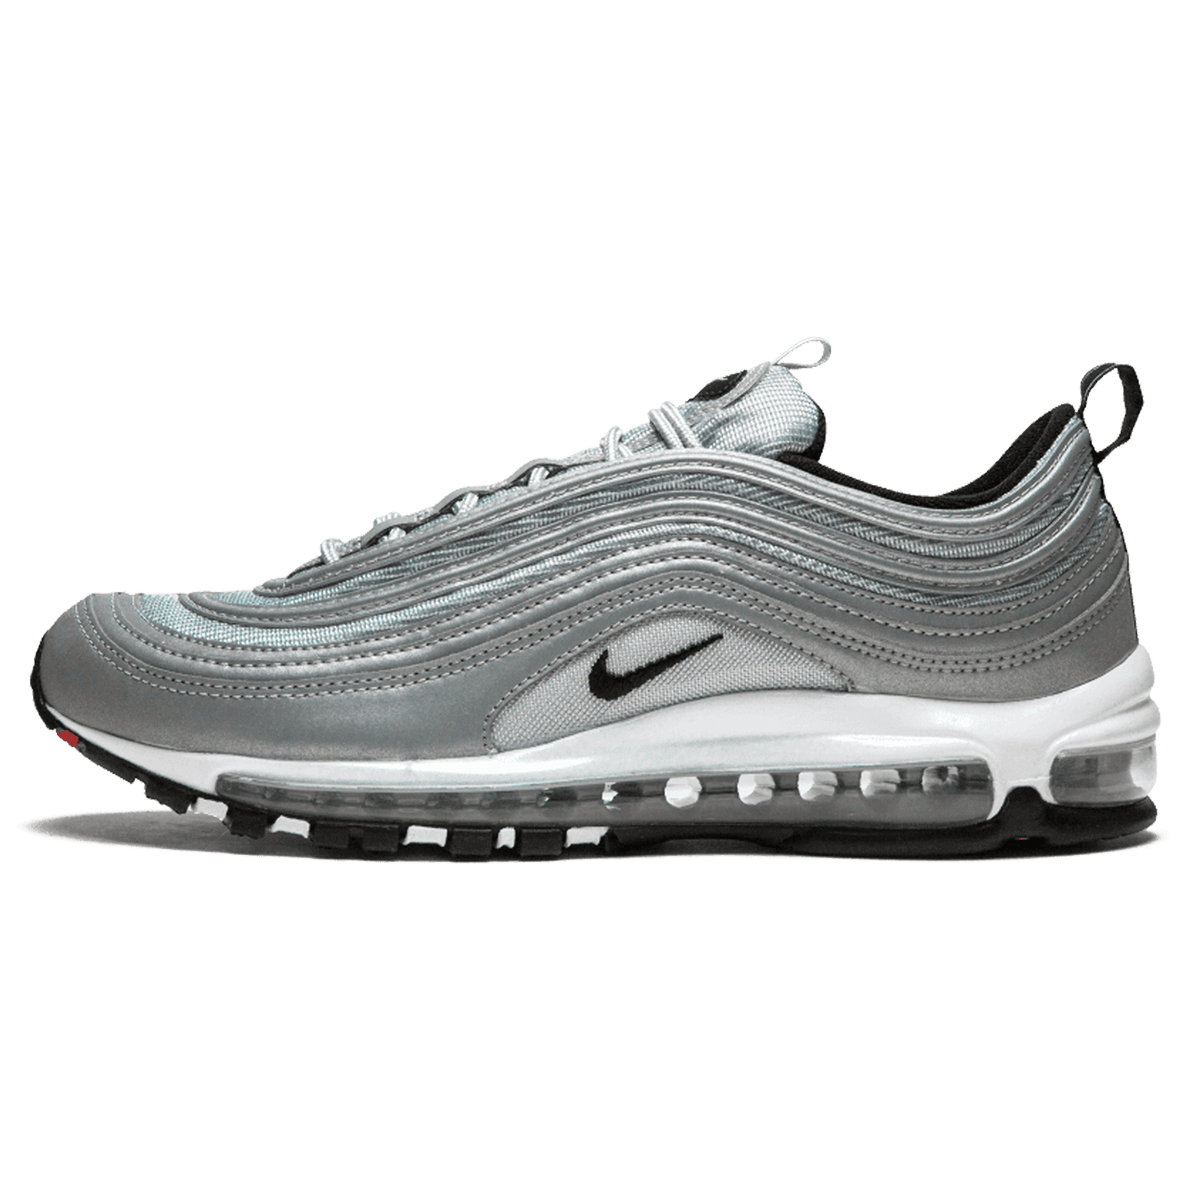 Nike Rugby Boots NZ 97 'Reflect Silver' - CerbeShops